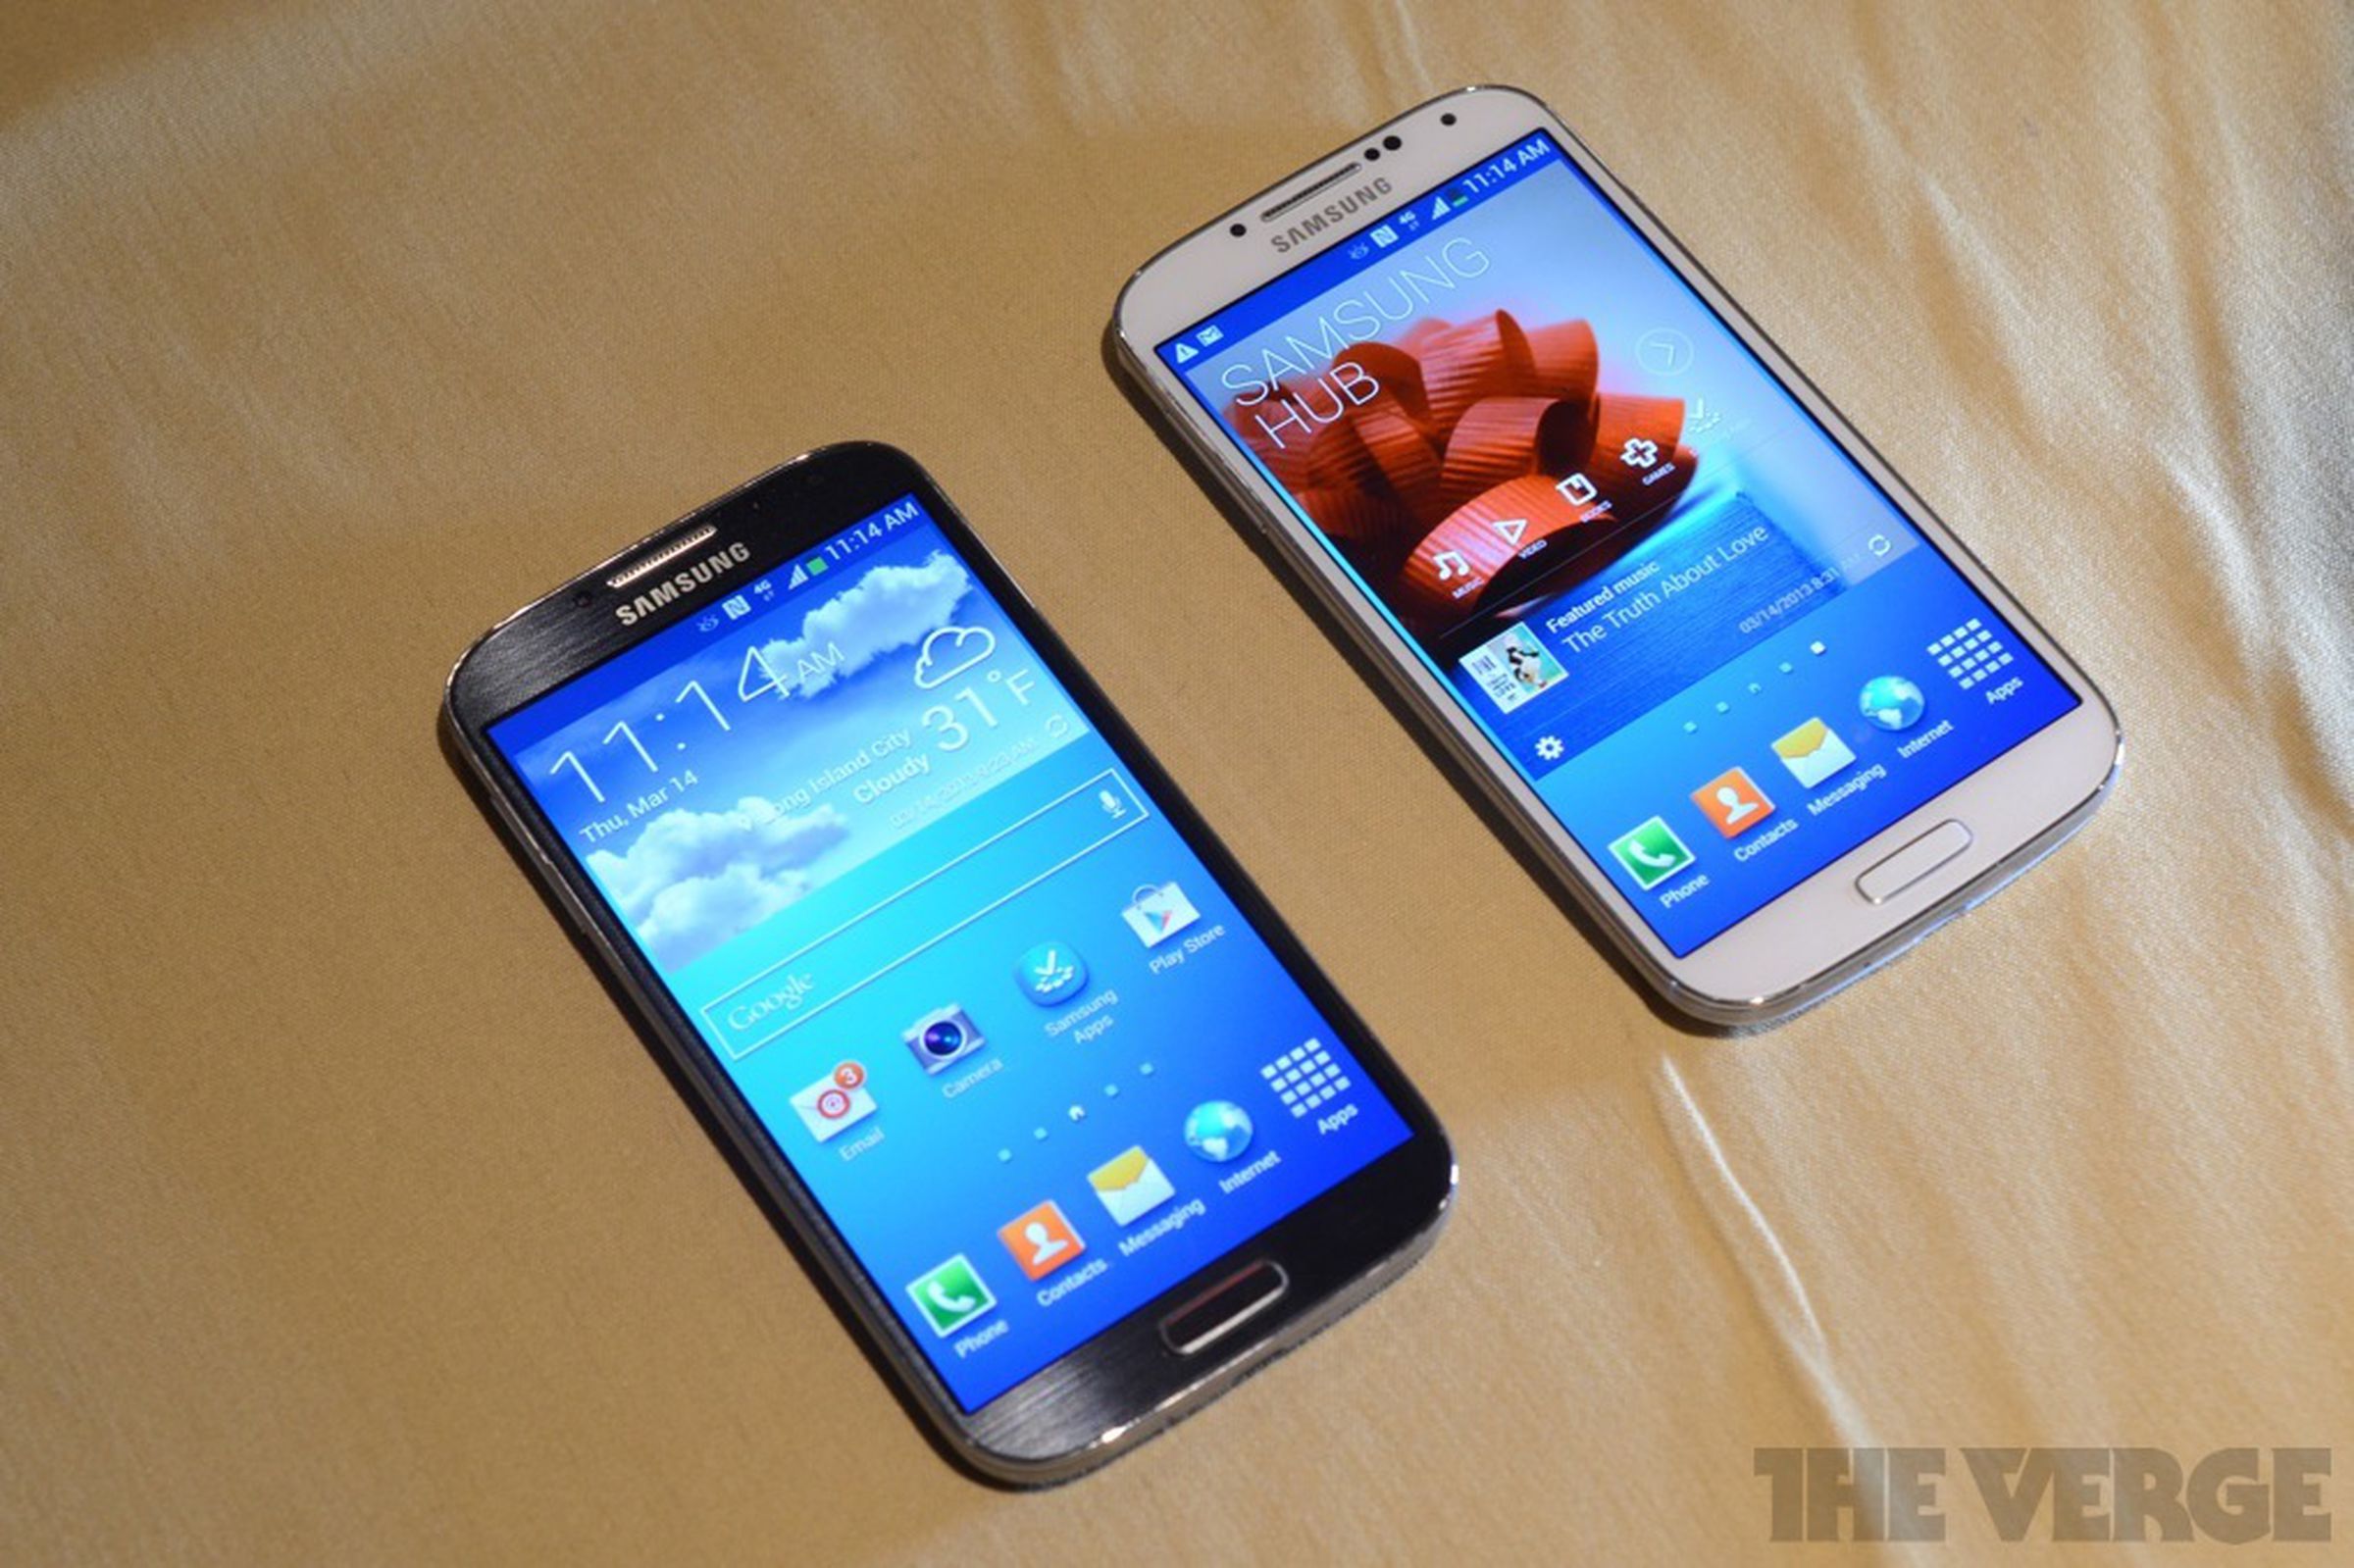 Samsung Galaxy S4 hands-on pictures